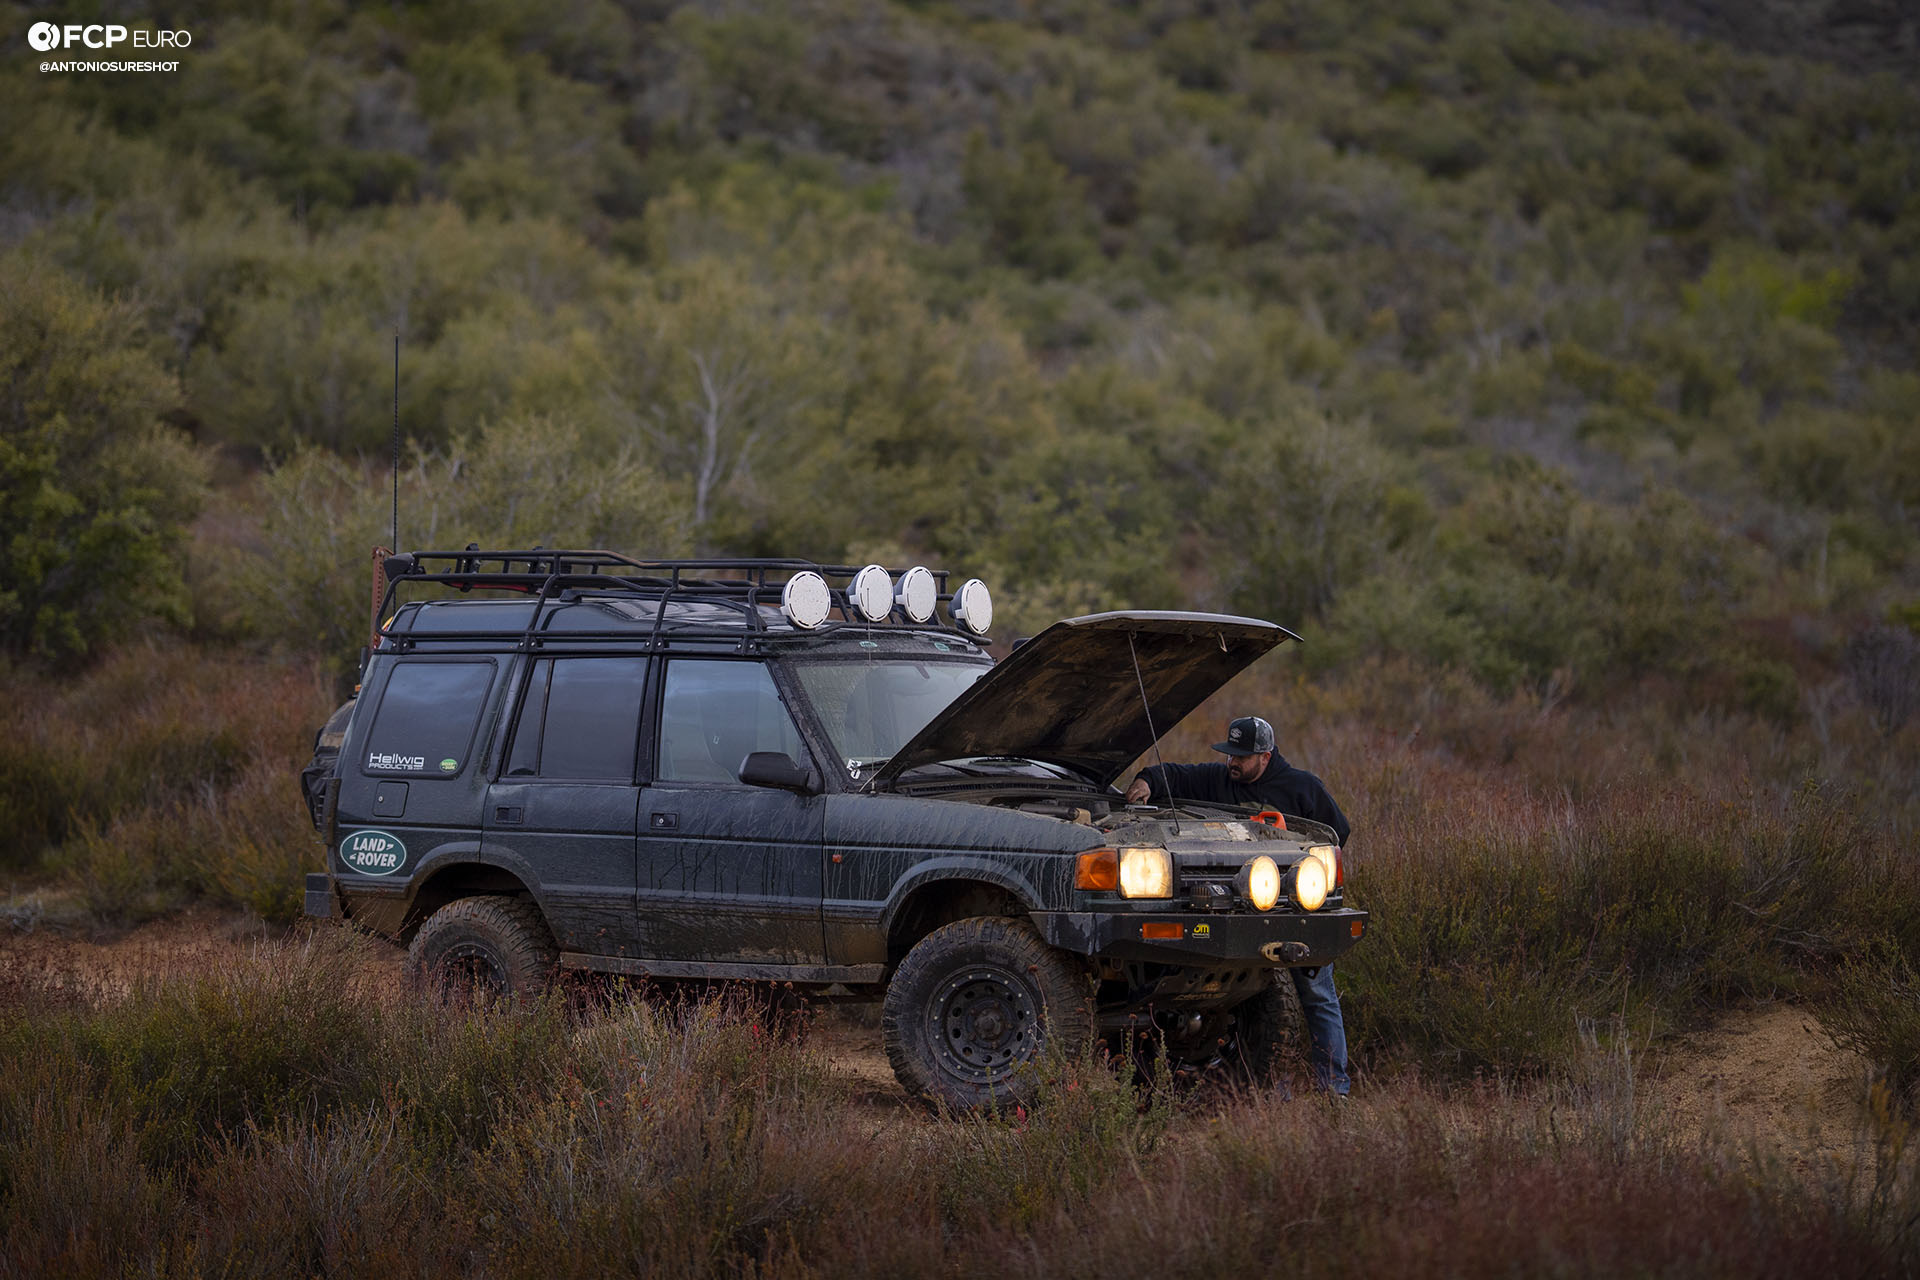 Land Rover, Land Rover Discovery, TJM bumper, Hella fogllights, hellwig, offroad, overland